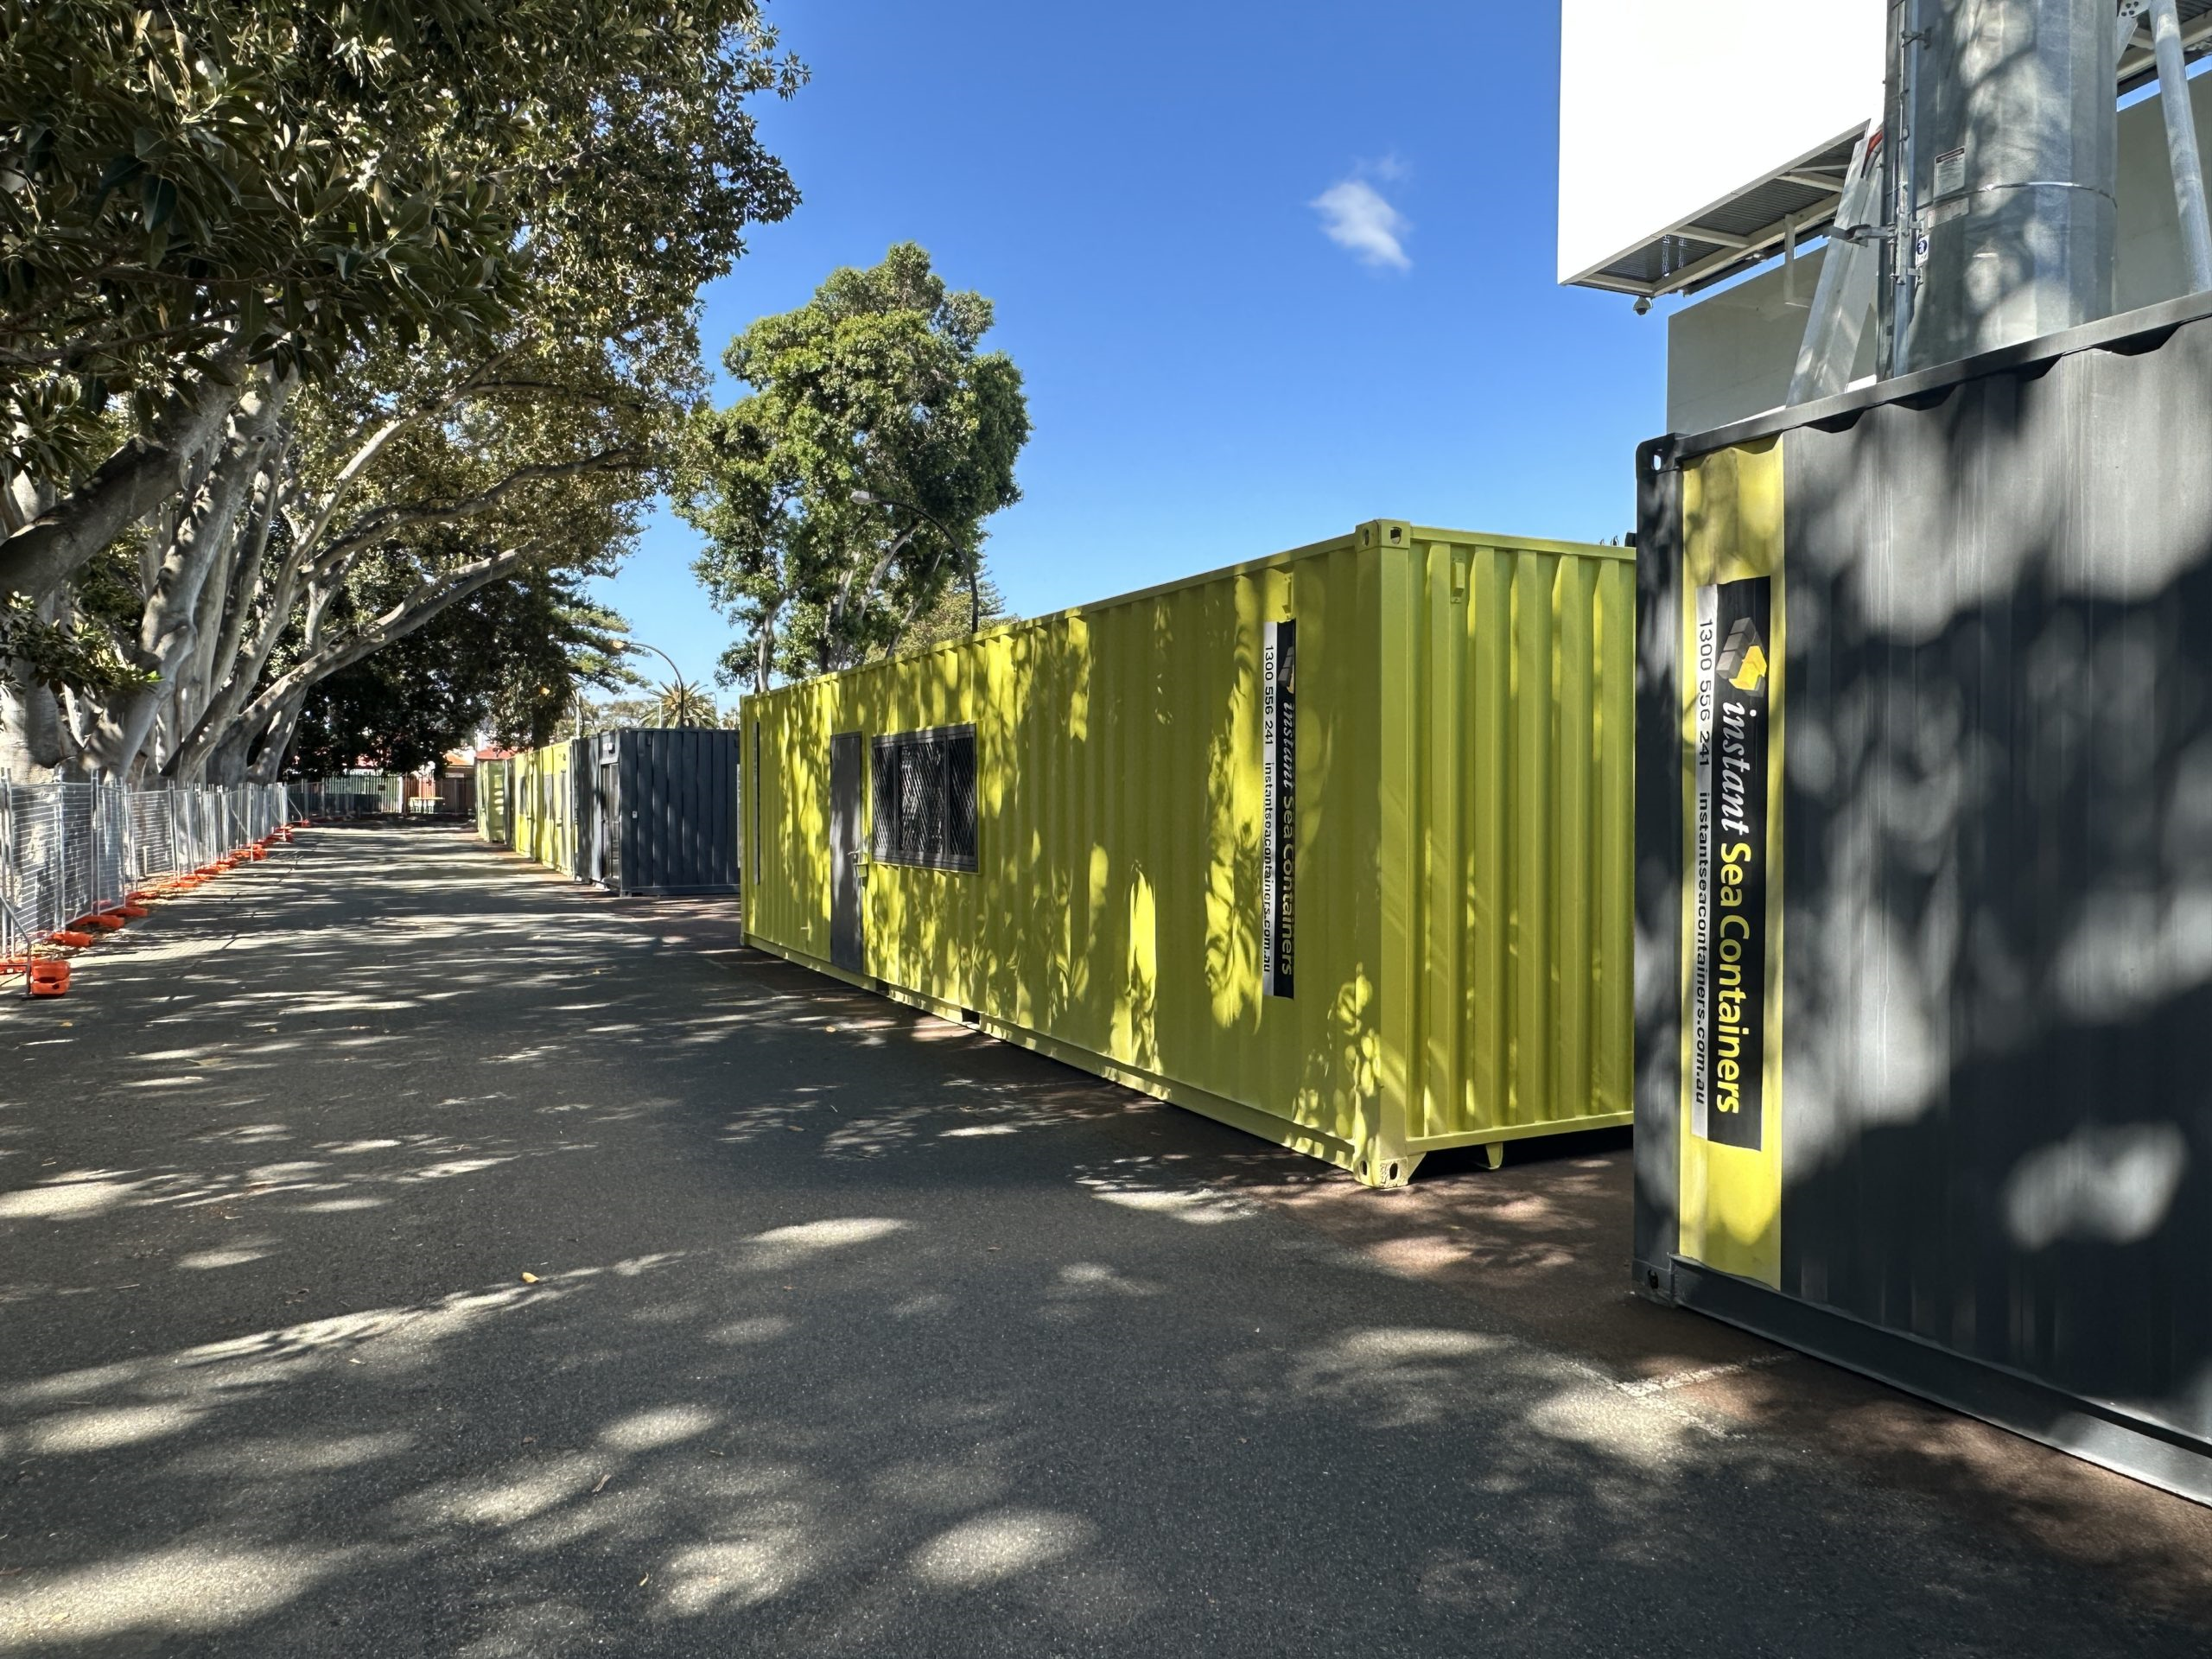 Yellow and gray shipping containers used as temporary offices, lined up along a shaded street with trees and dappled sunlight.